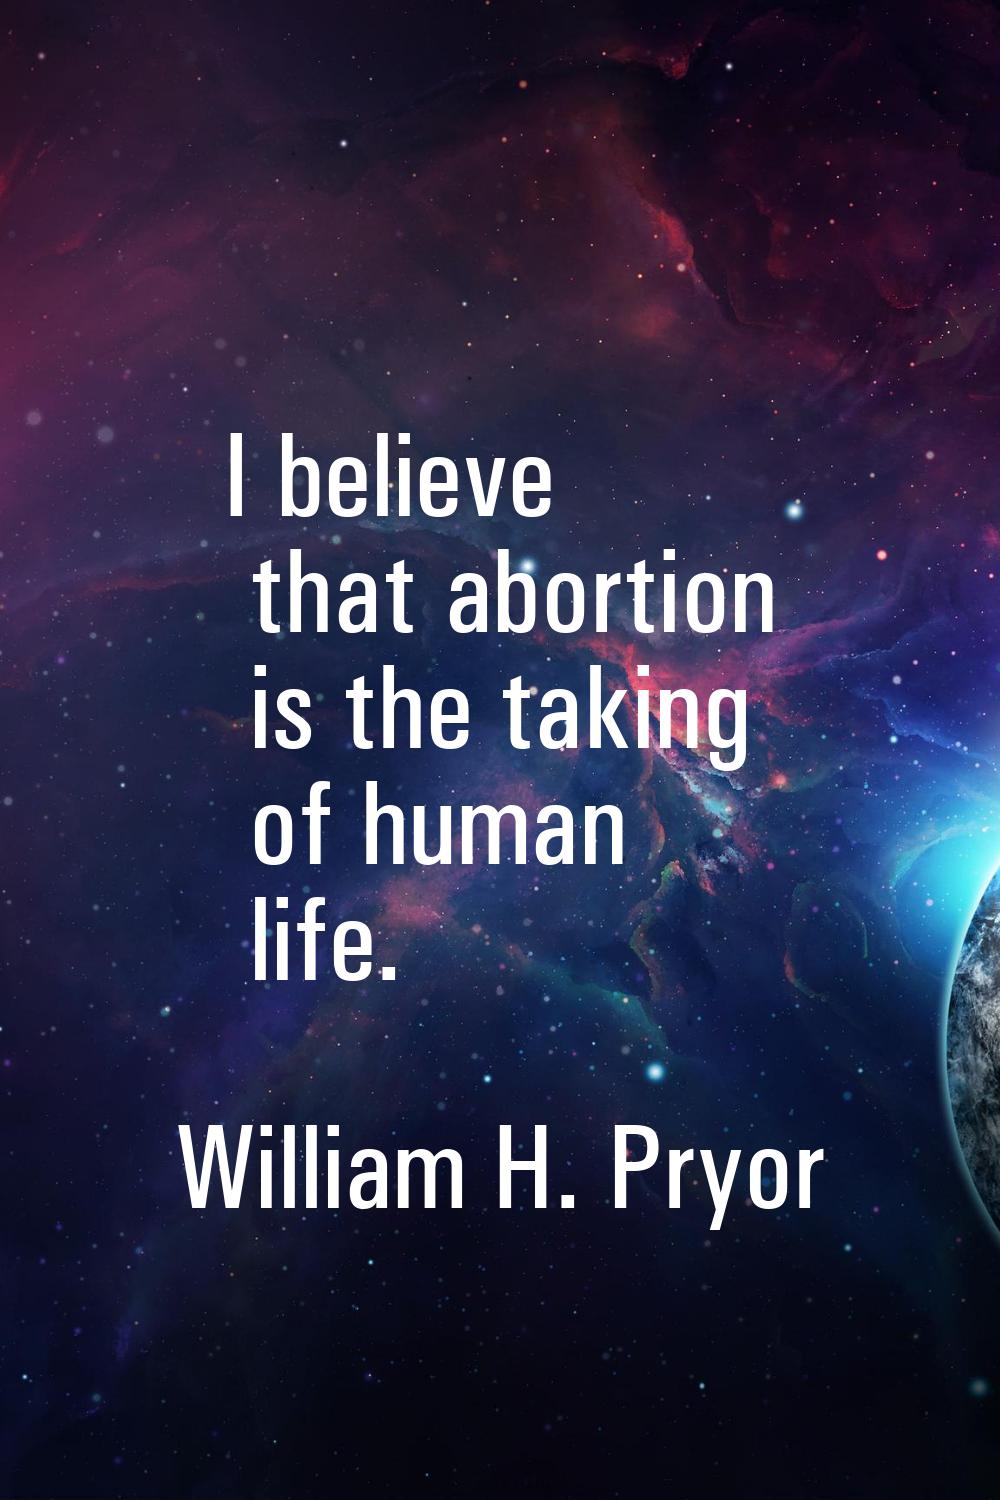 I believe that abortion is the taking of human life.